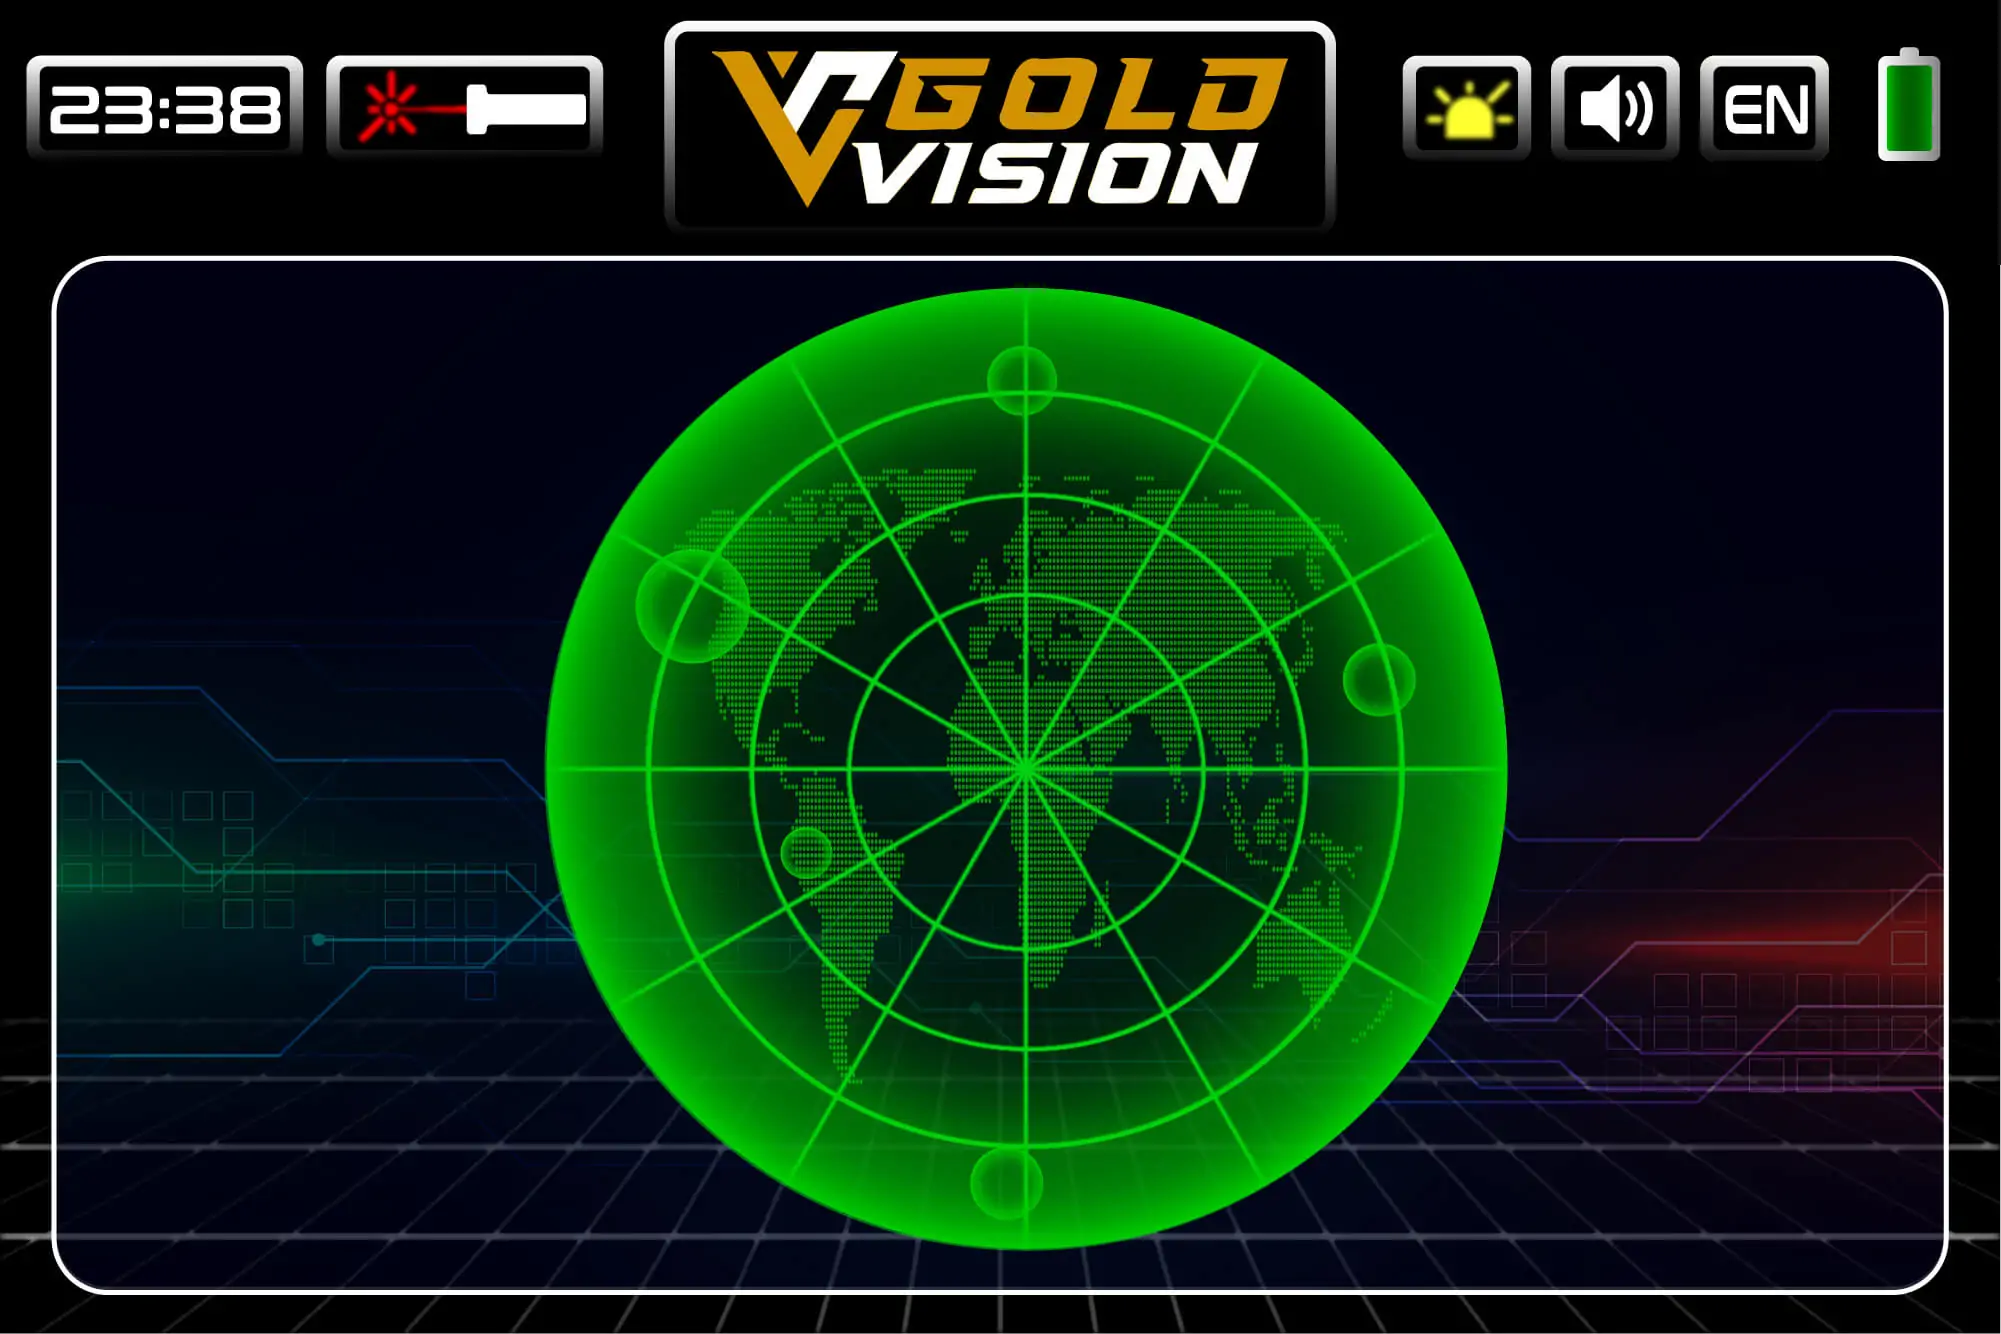 BIONIC system gold vision